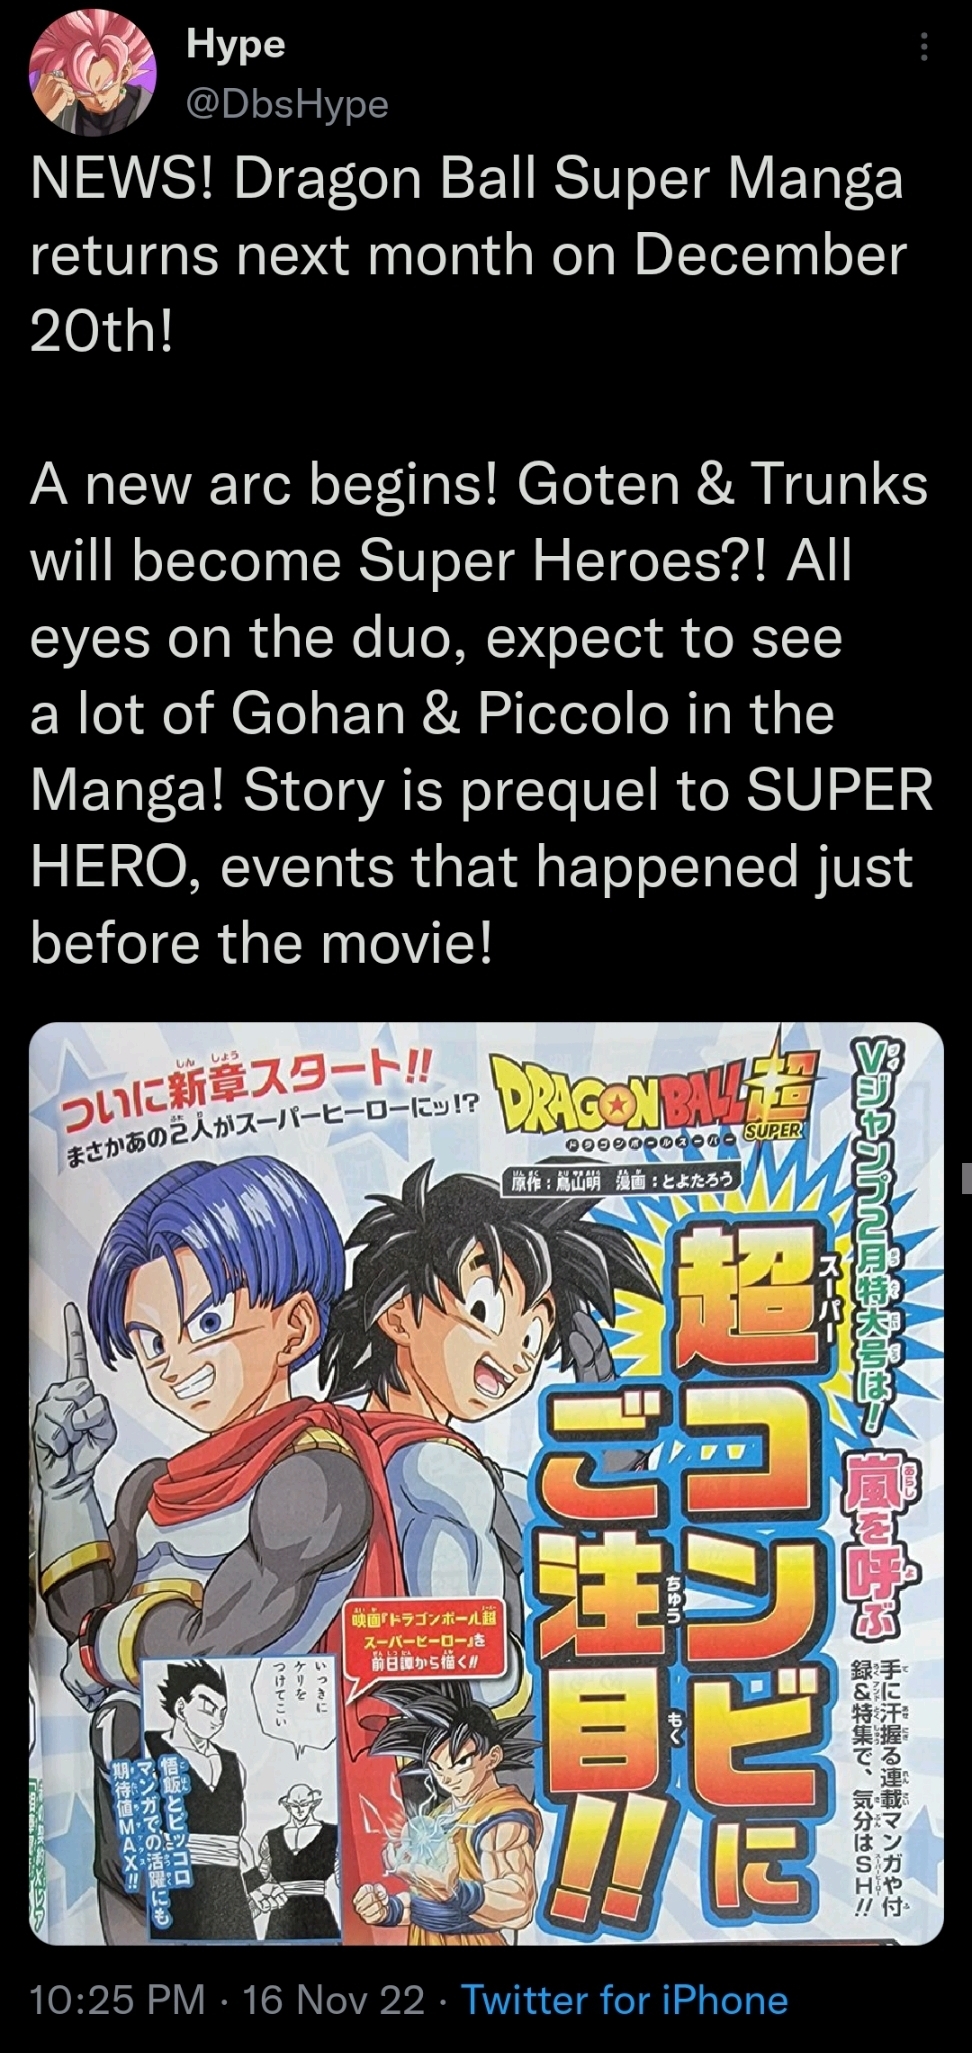 Changes to the DBS: Super Hero Movie in the Dragon Ball Super Manga